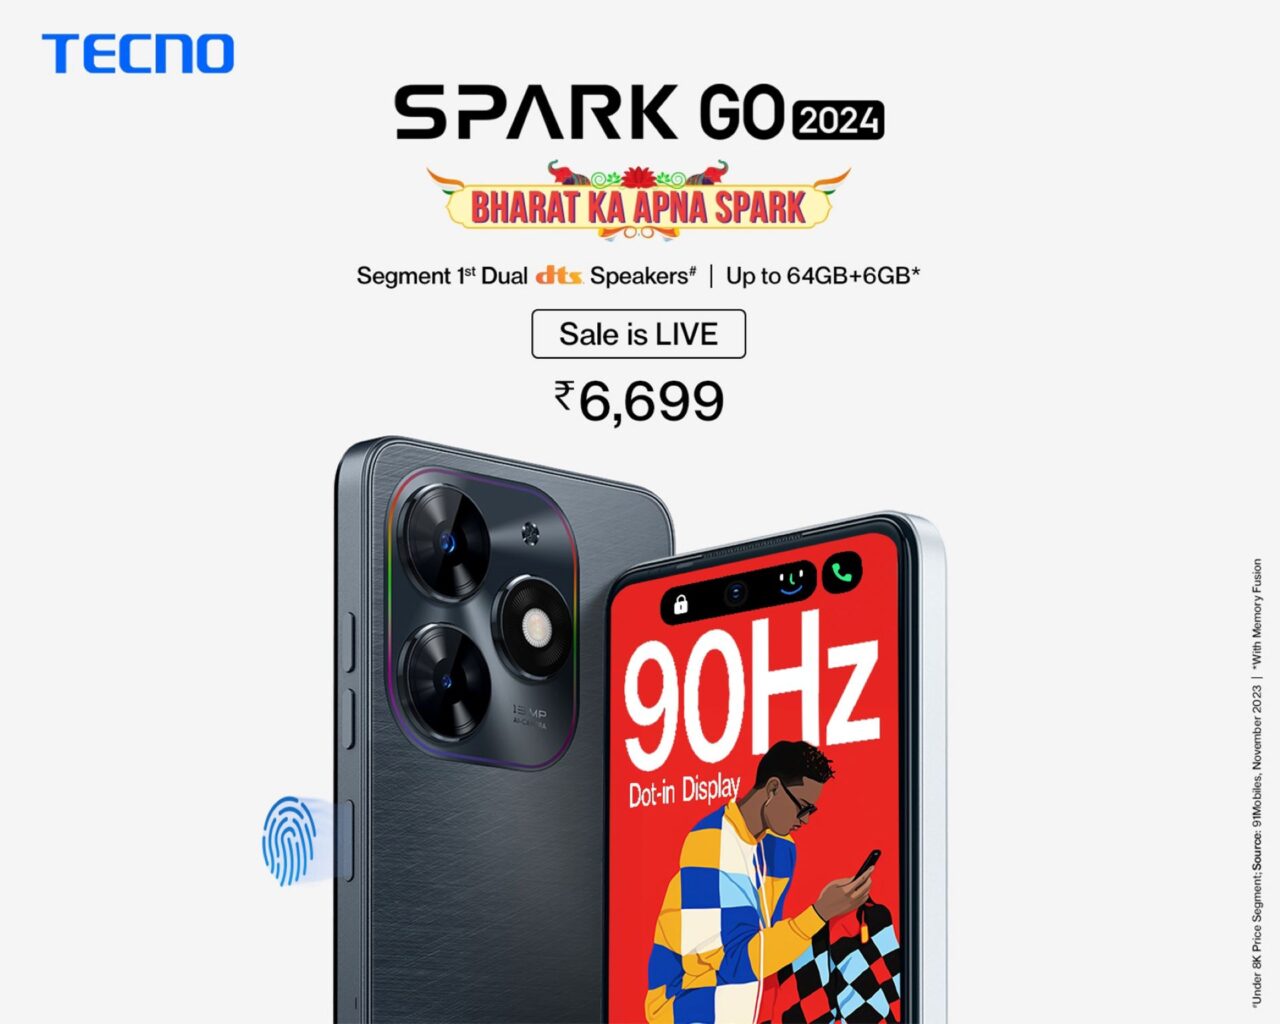 TECNO SPARK Go 2024 Launches in India with Advanced Features